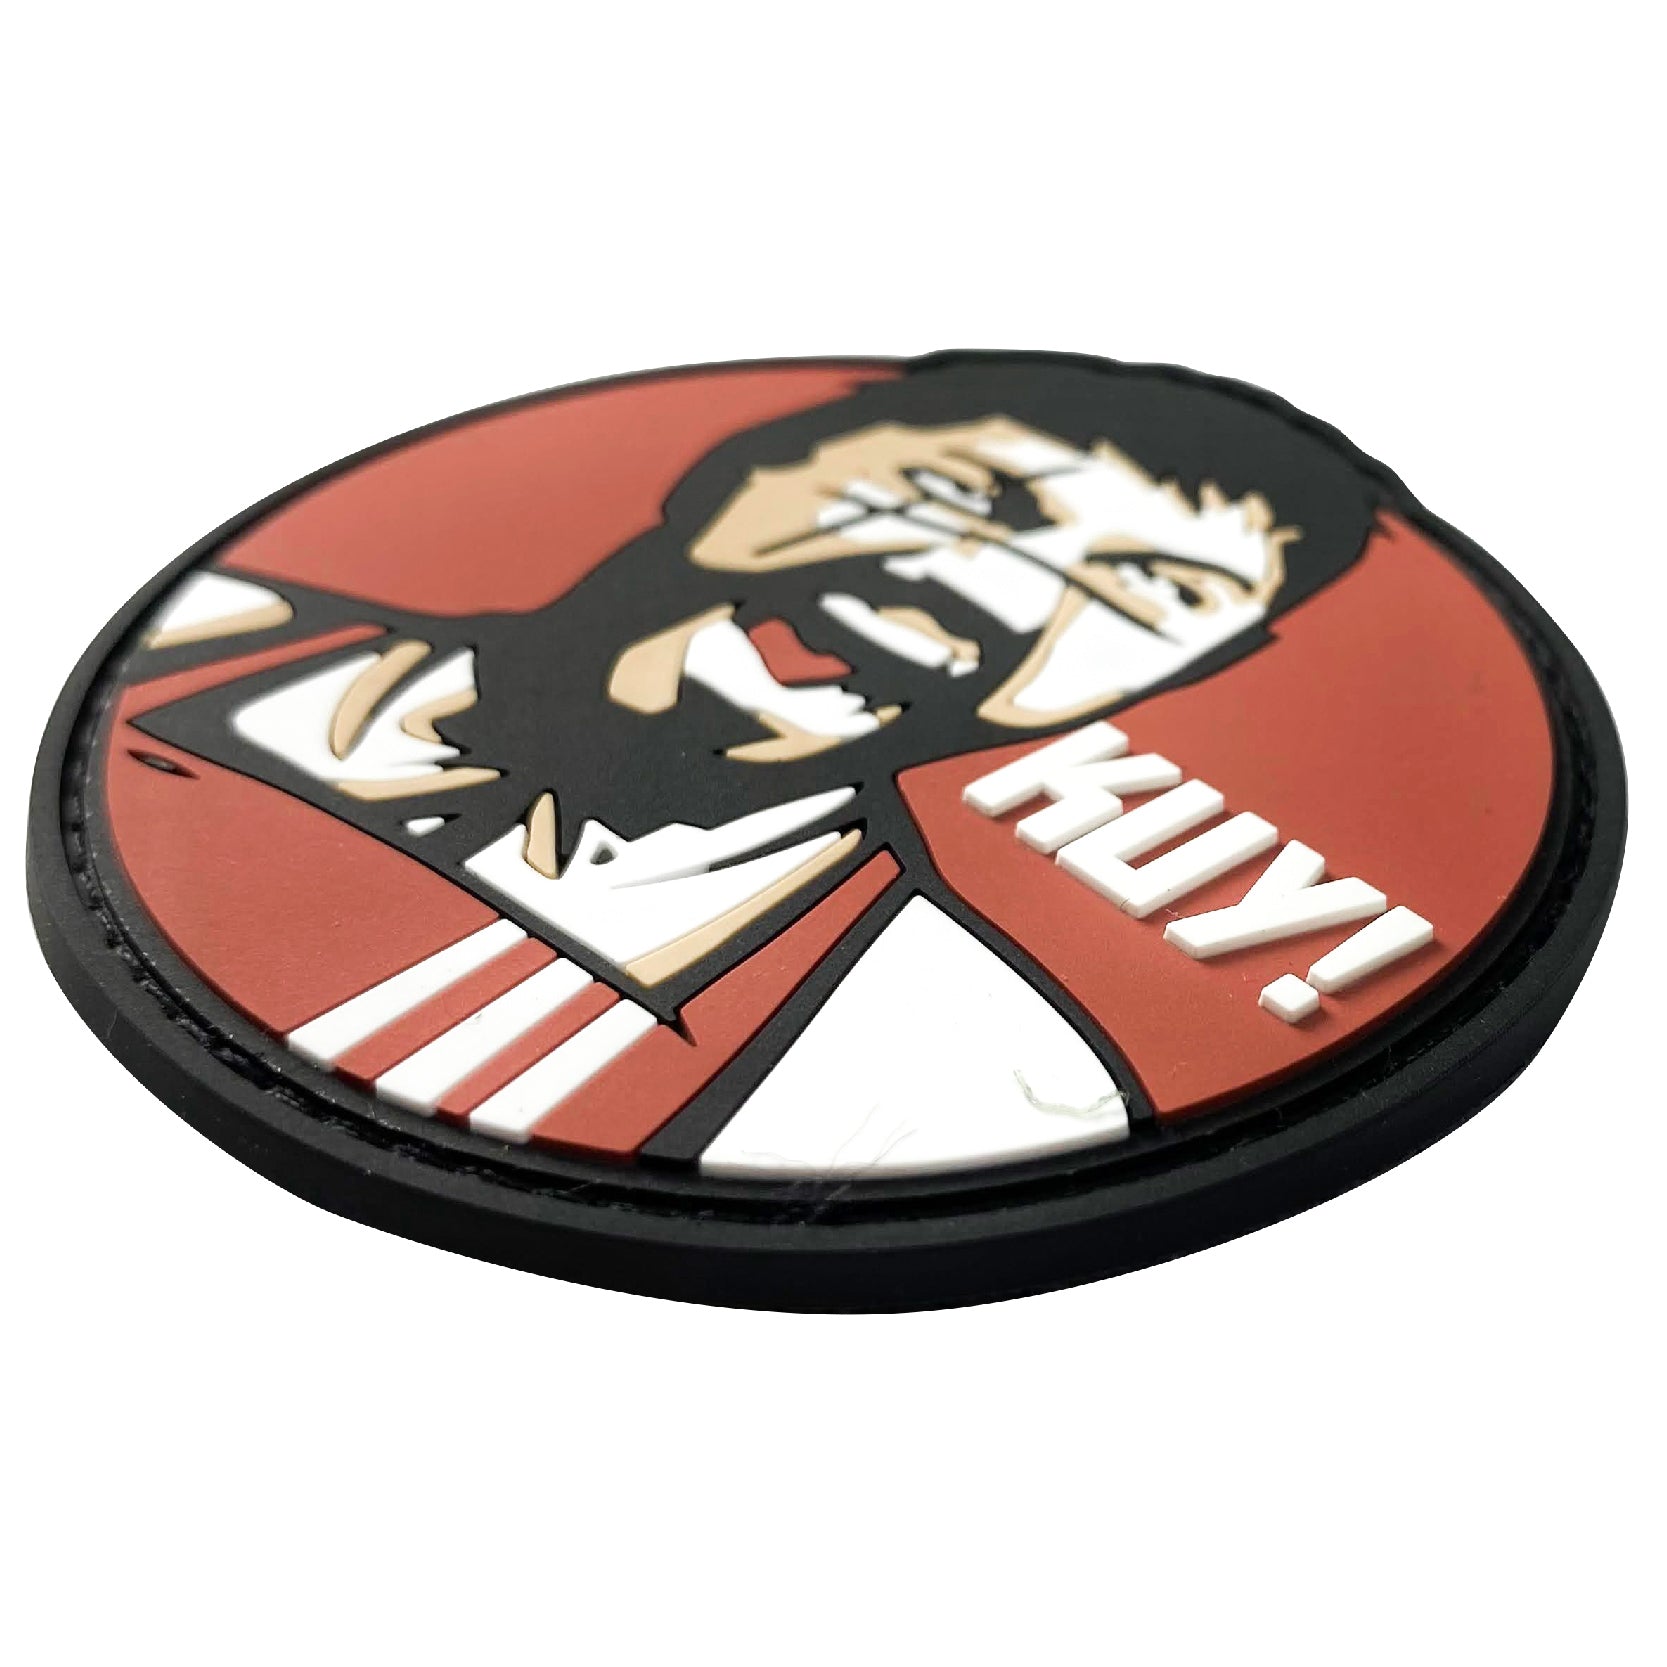 Valor PX PVC Patches - KUY!